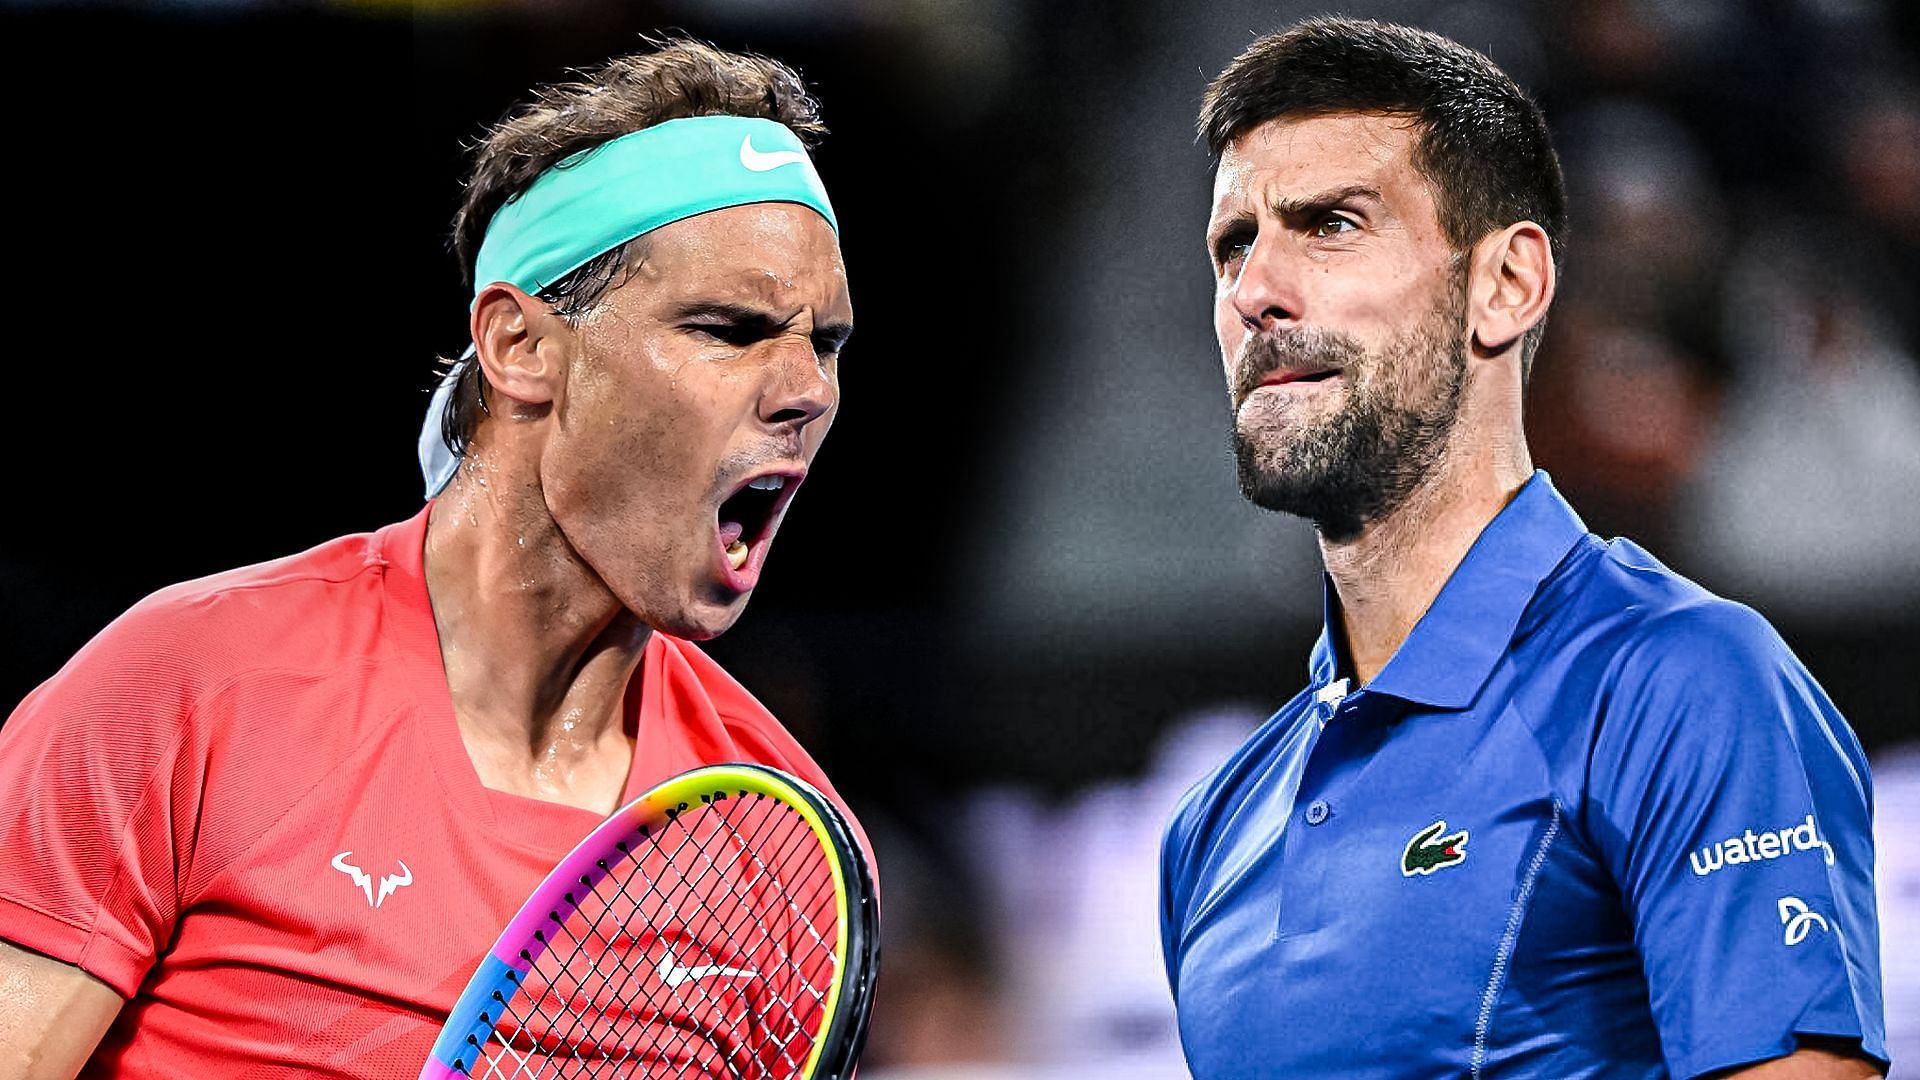 Both Nadal and Djokovic will play in Indian Wells